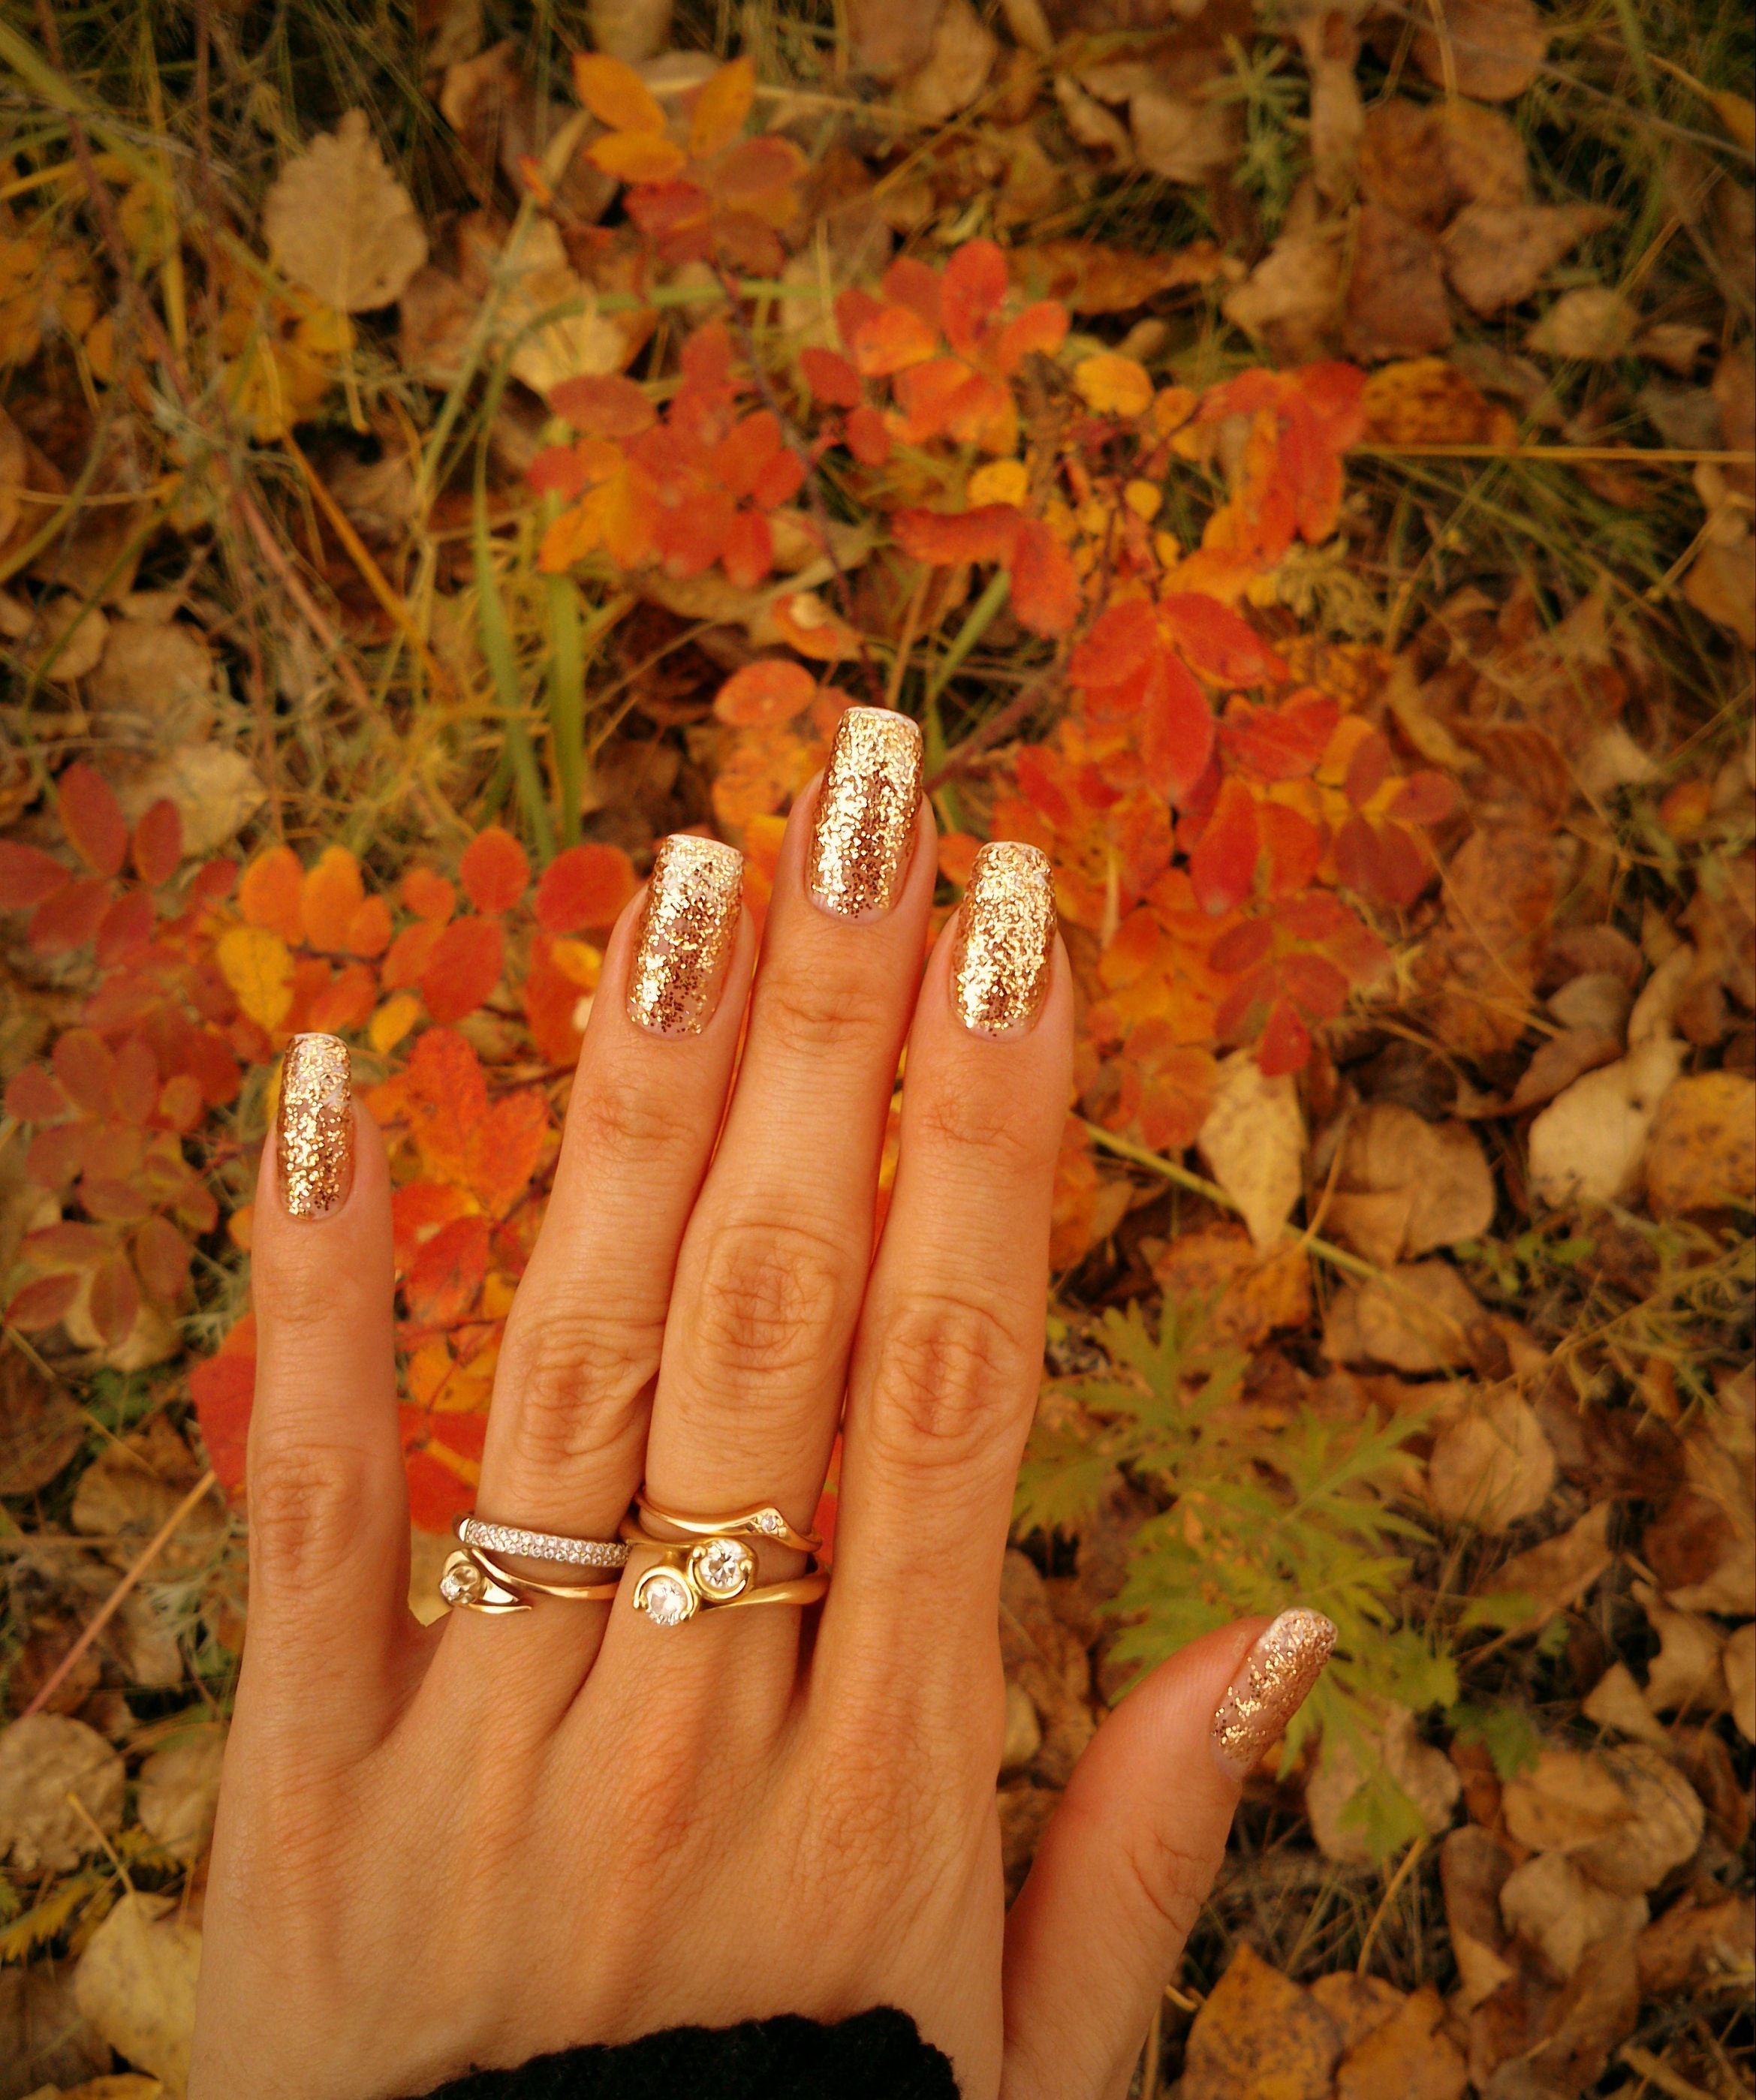 Glitter Nails with Jewels and Gold Make You Look Flashy and Charming.